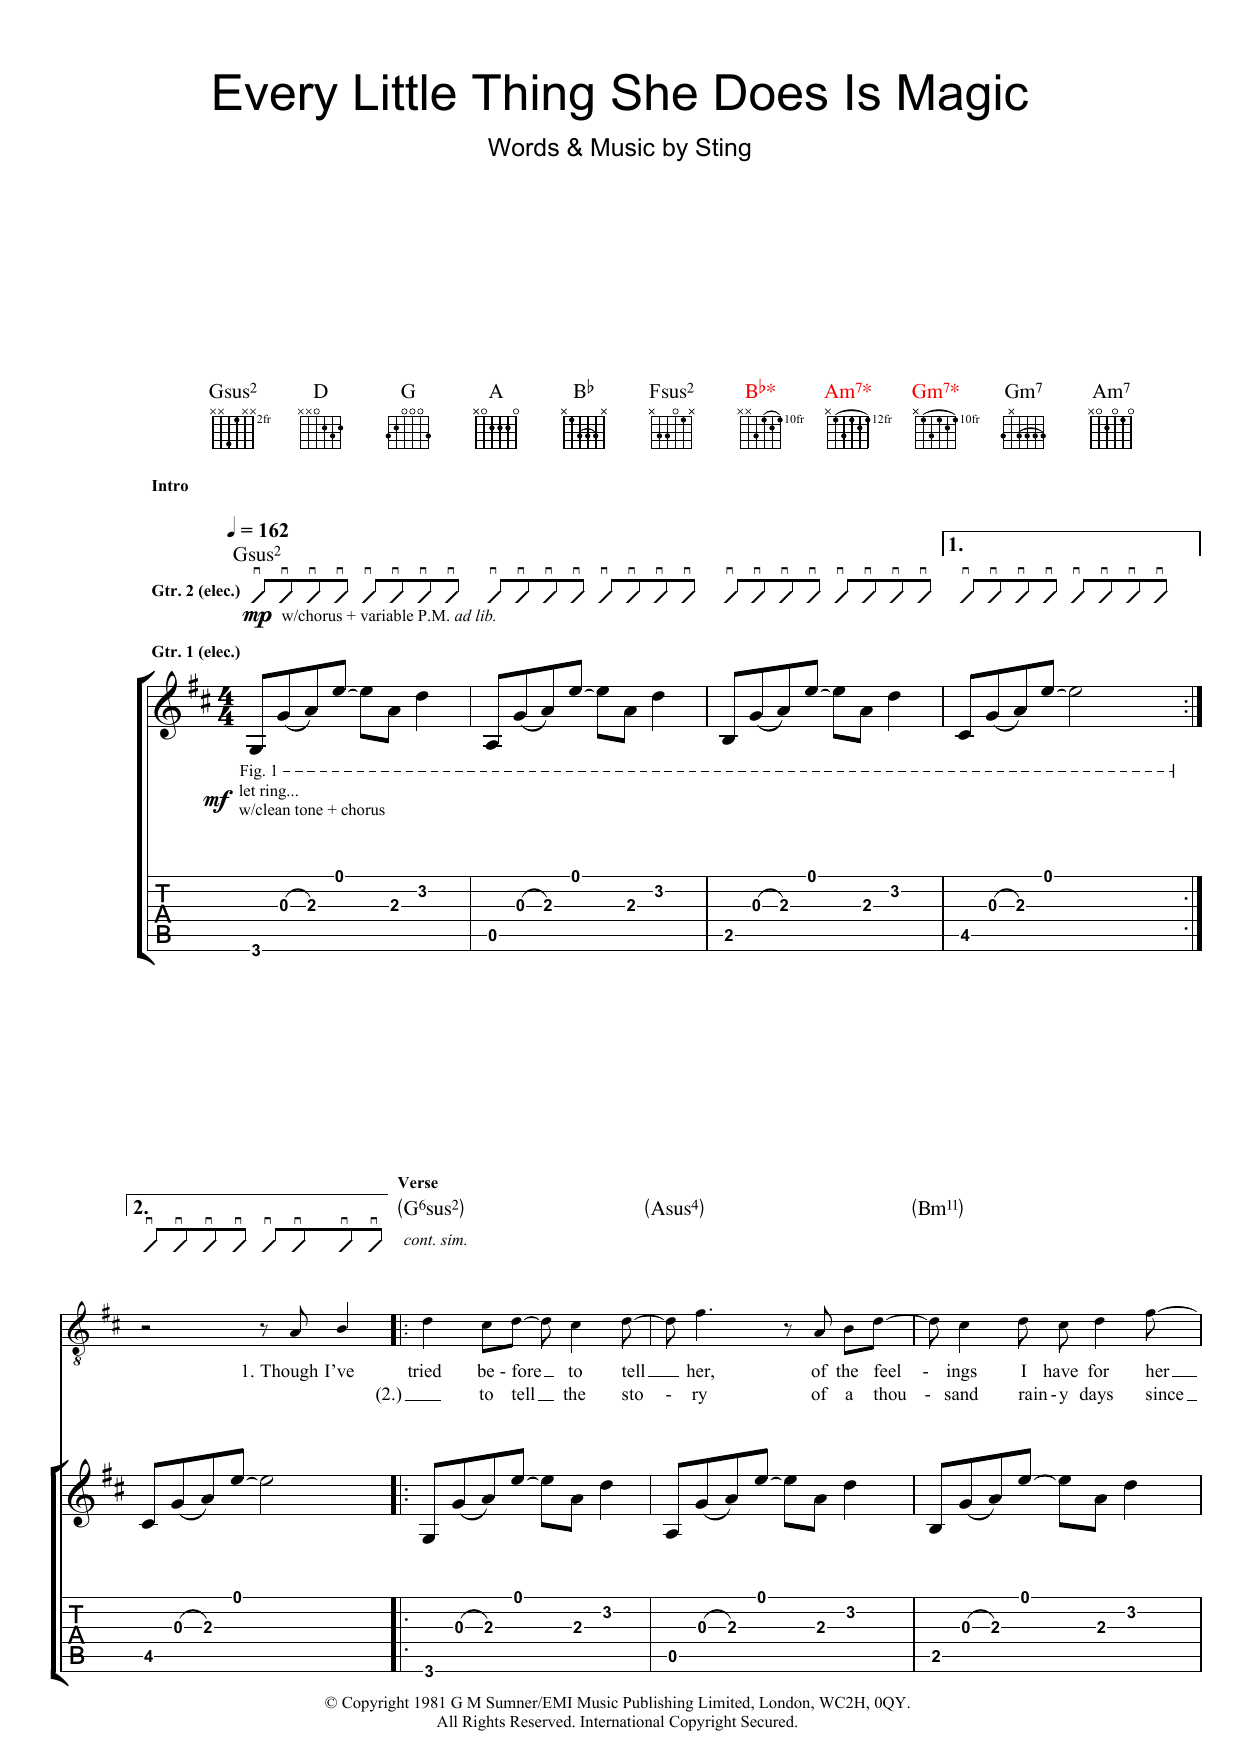 Download The Police Every Little Thing She Does Is Magic Sheet Music